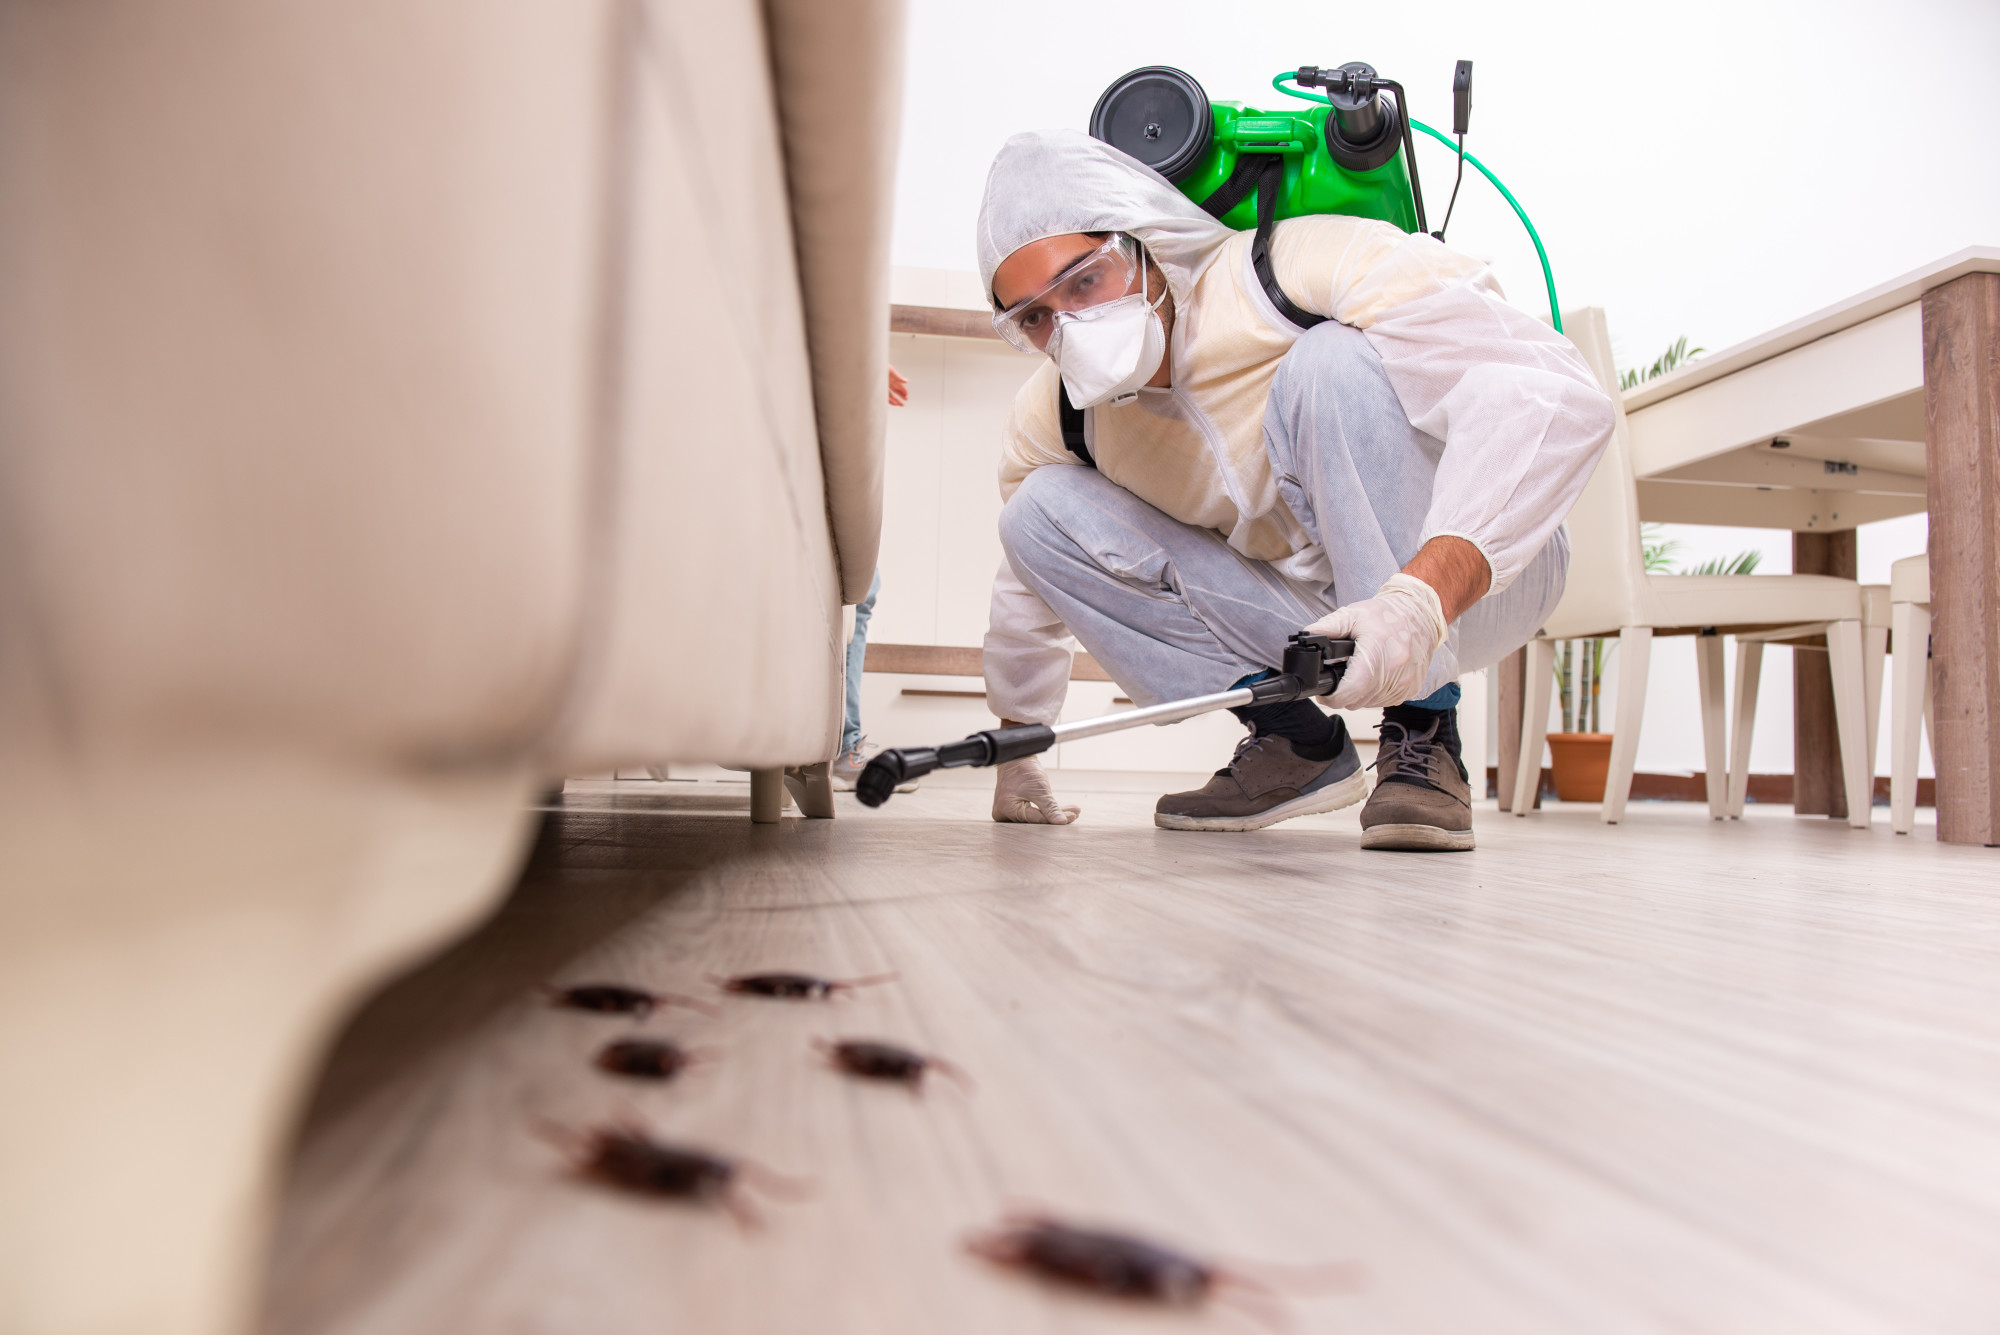 Finding the right experts to get rid of pests in your home requires knowing your options. Here is a guide on how to pick a pest control company.